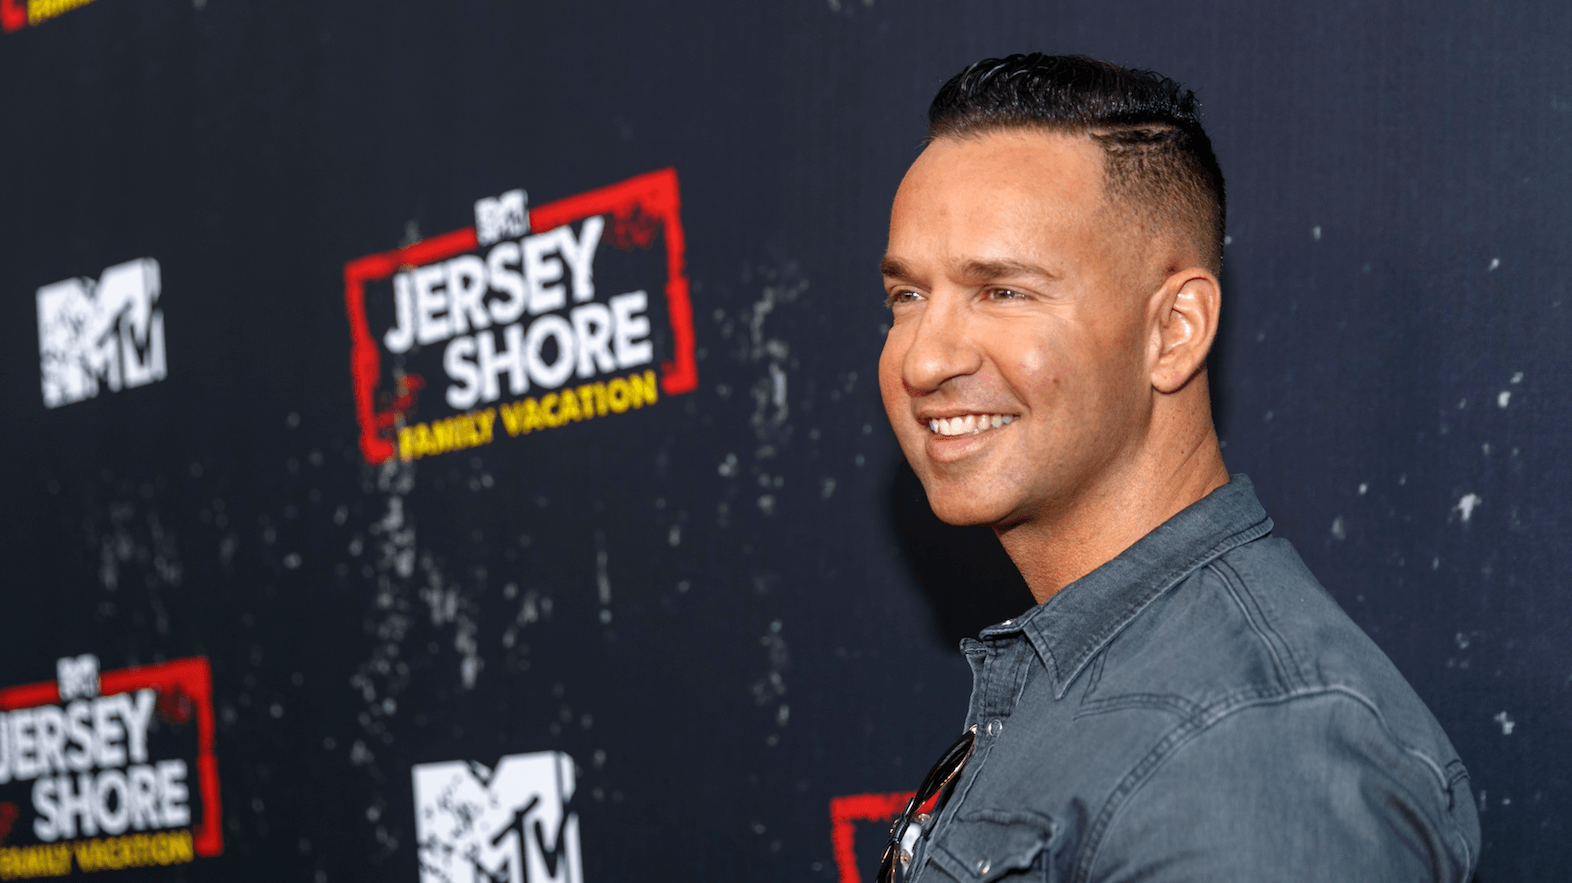 Mike 'The Situation' Sorrentino Is Apparently a 'Slacker' Behind Bars